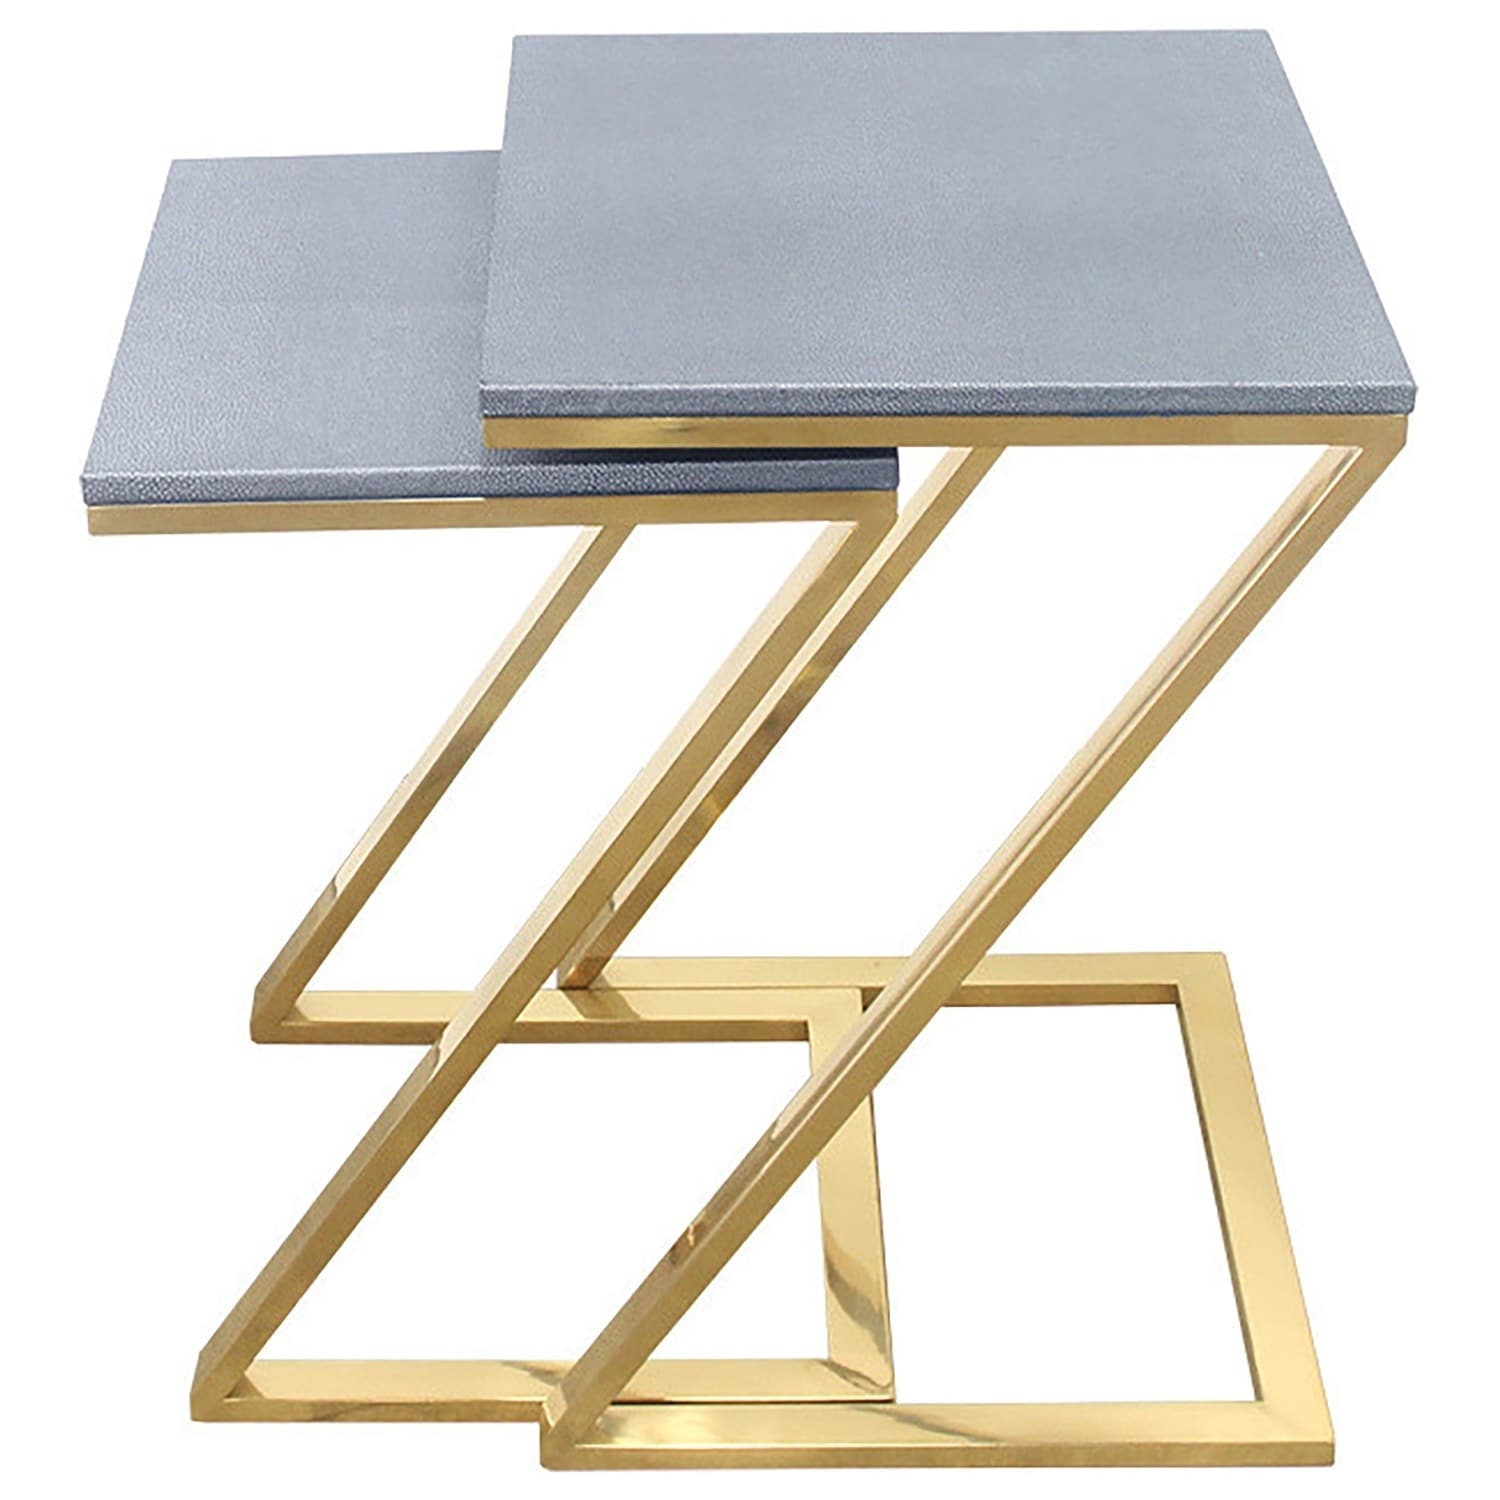 Urbanest Walter Z-Leg Nesting Tables, Faux Shagreen and Gold Metal, 2 Piece Set